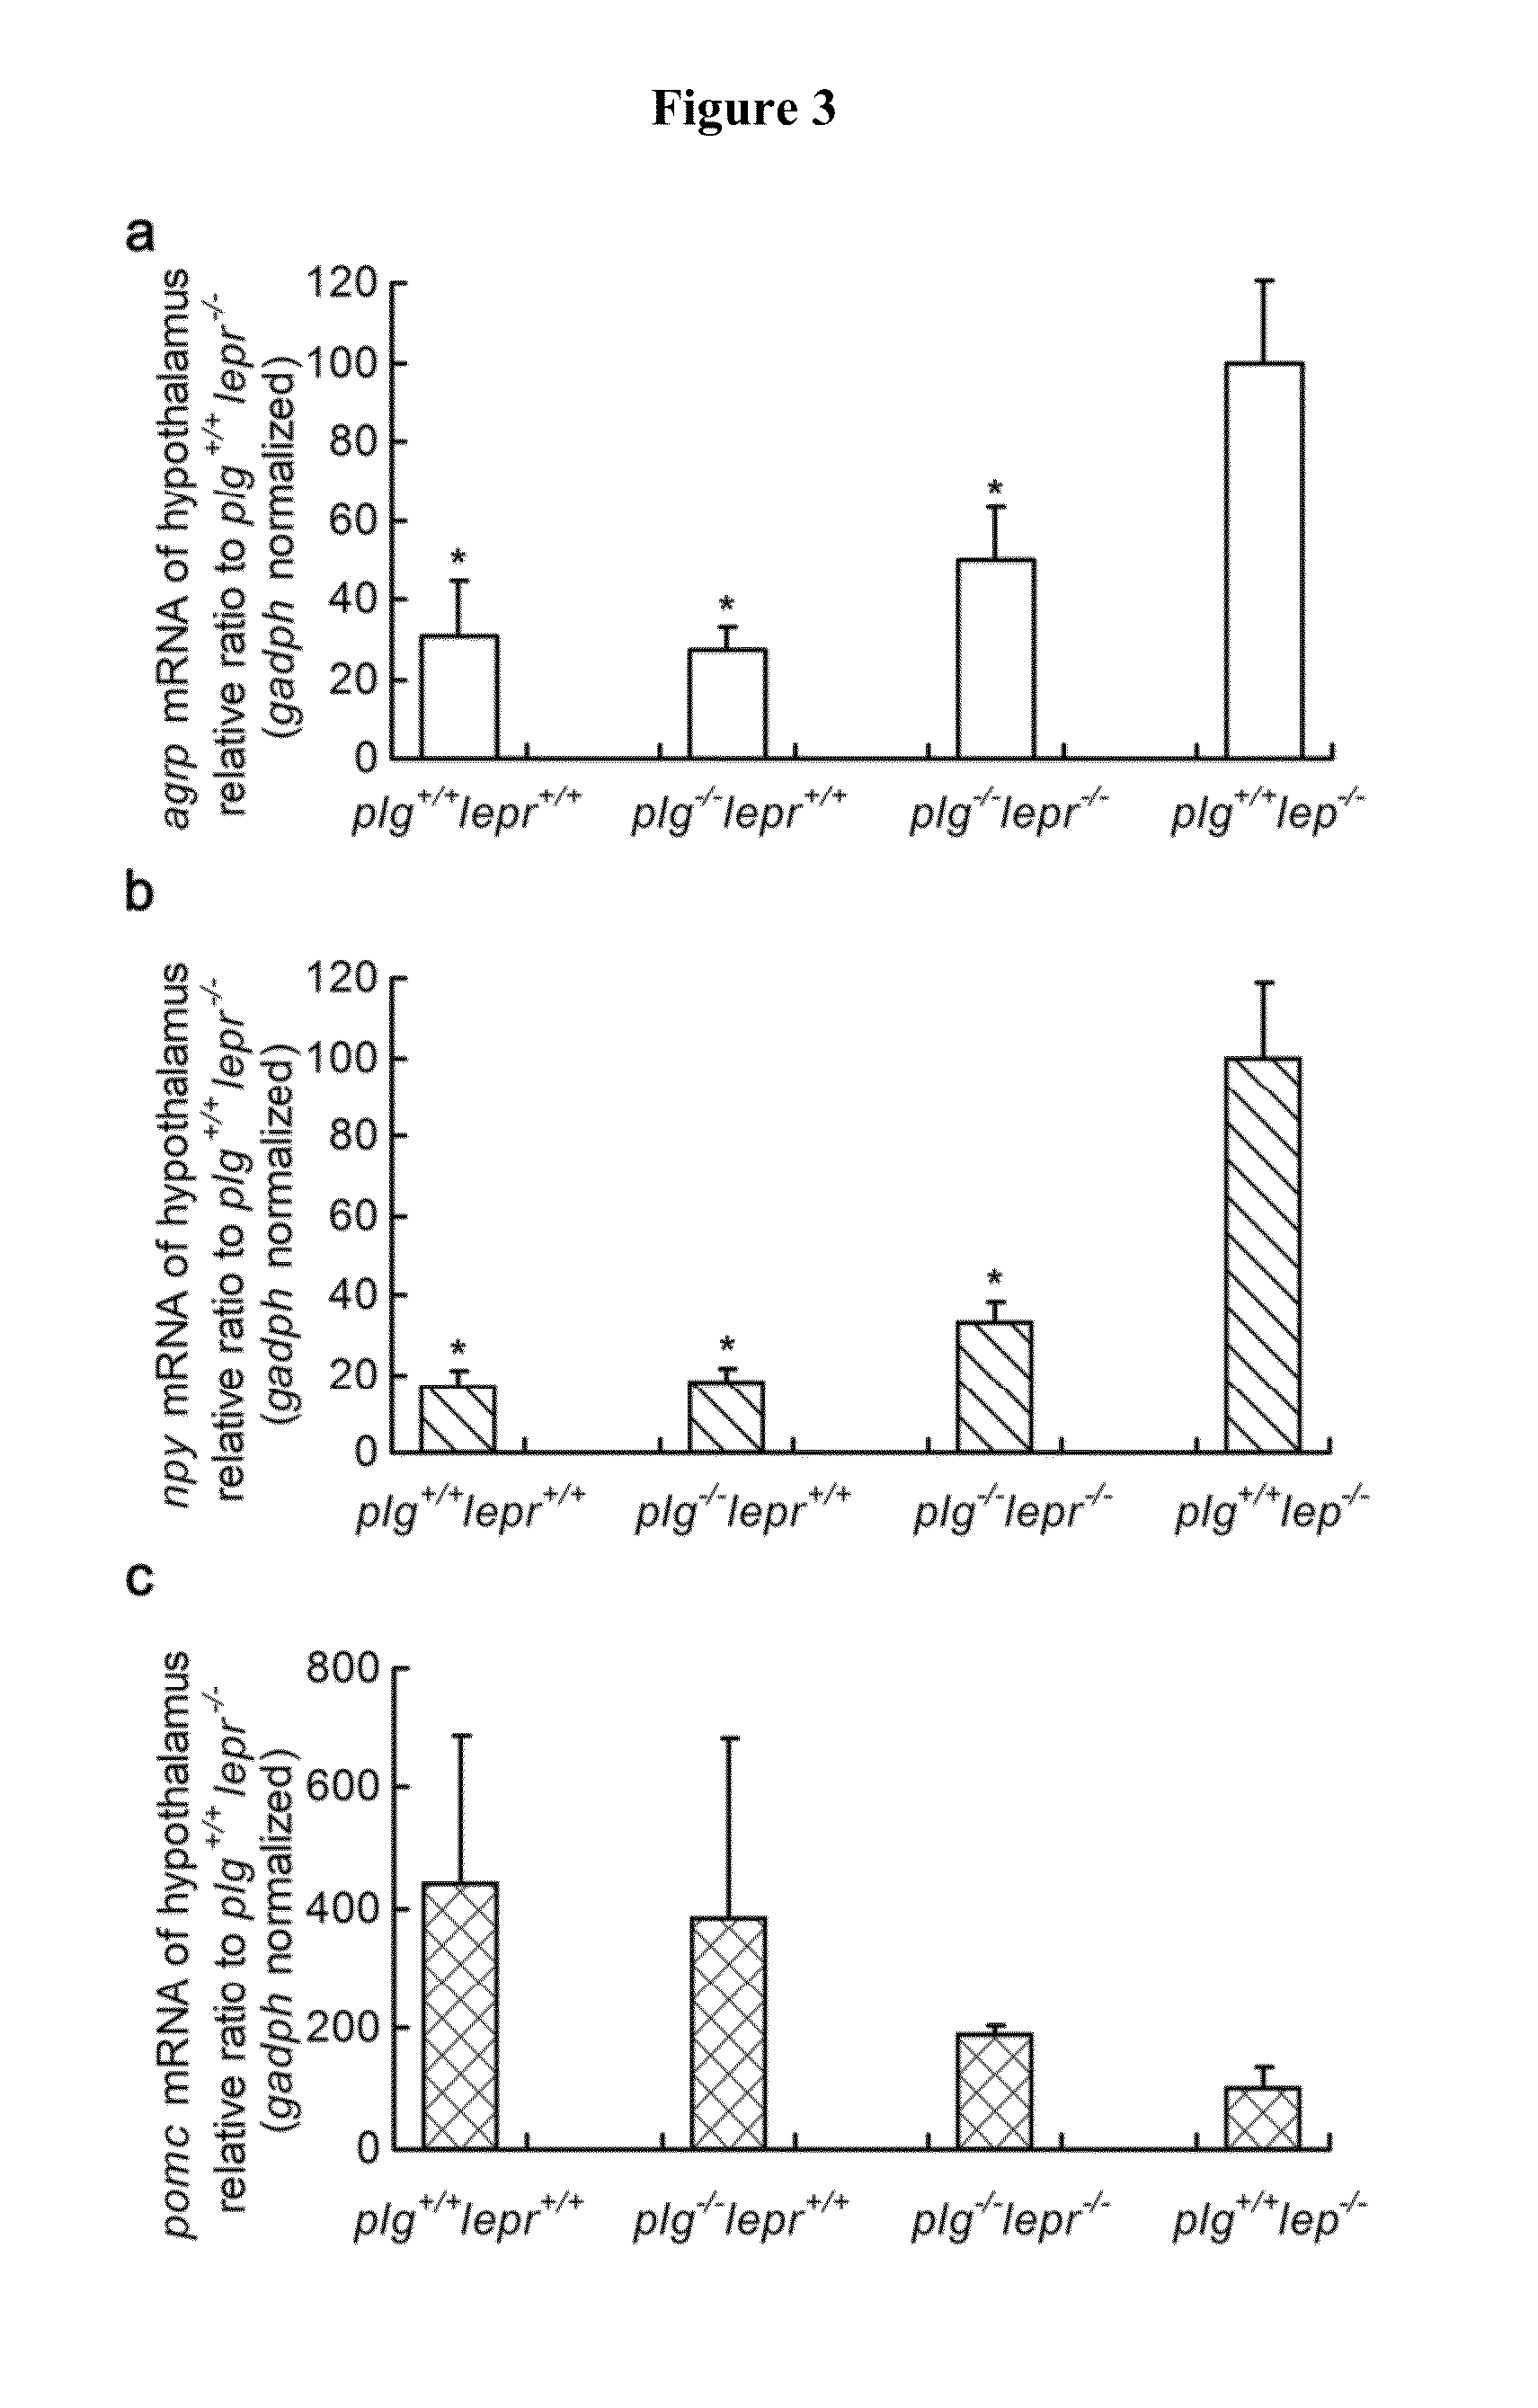 Plasma Anti-diabetic NUCB2 peptide (pladin) and uses thereof